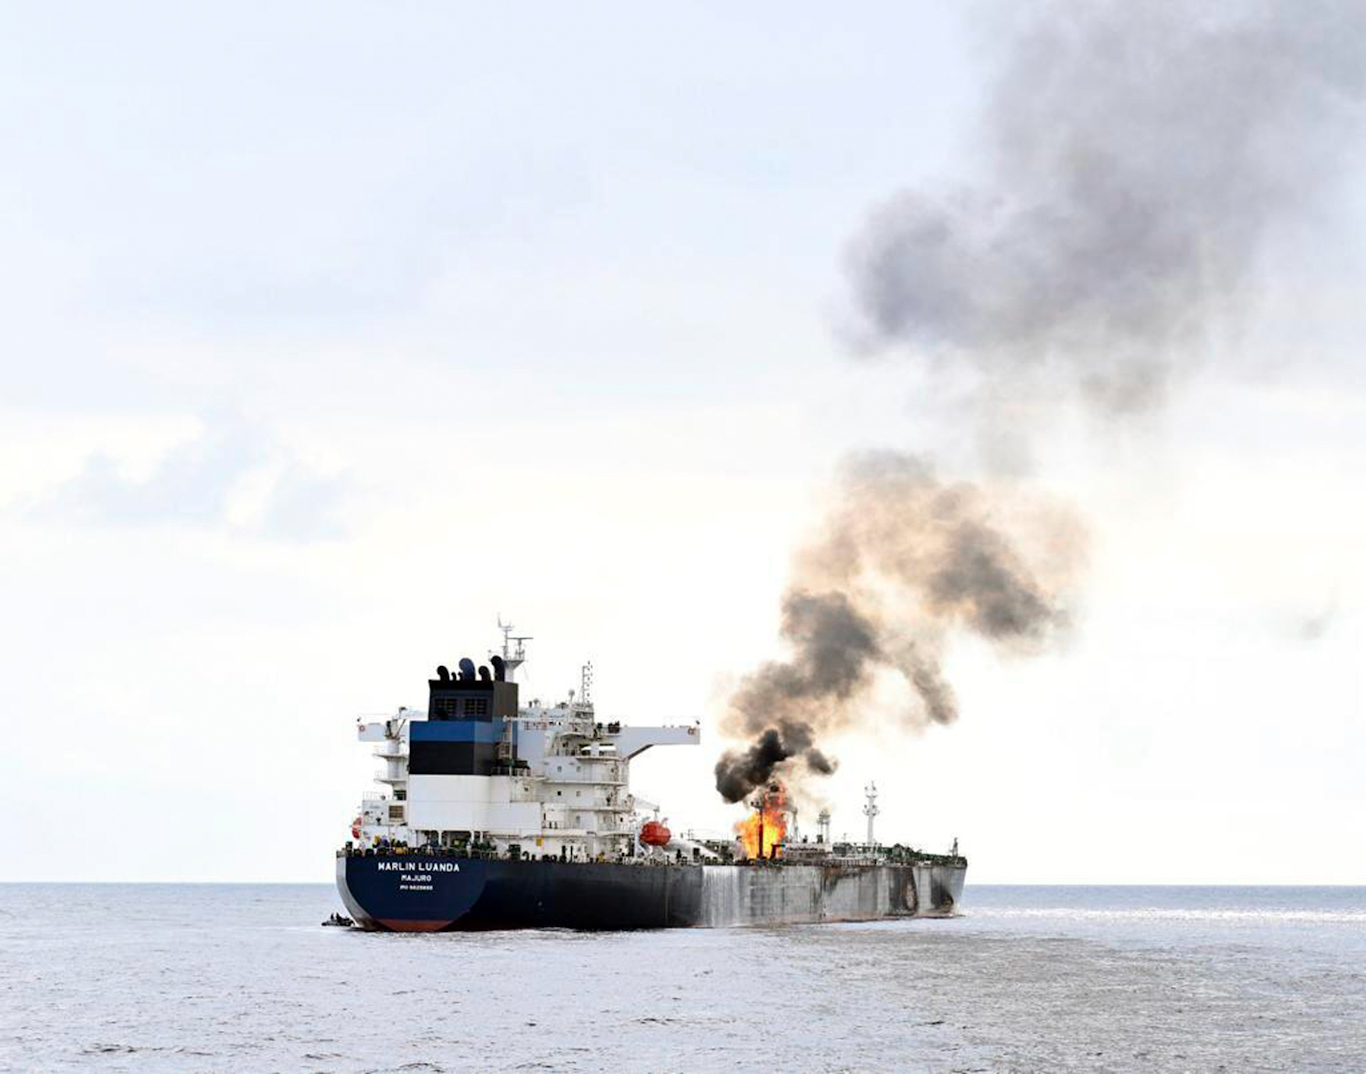 The Marlin Luanda on fire after an attack in the Gulf of Aden